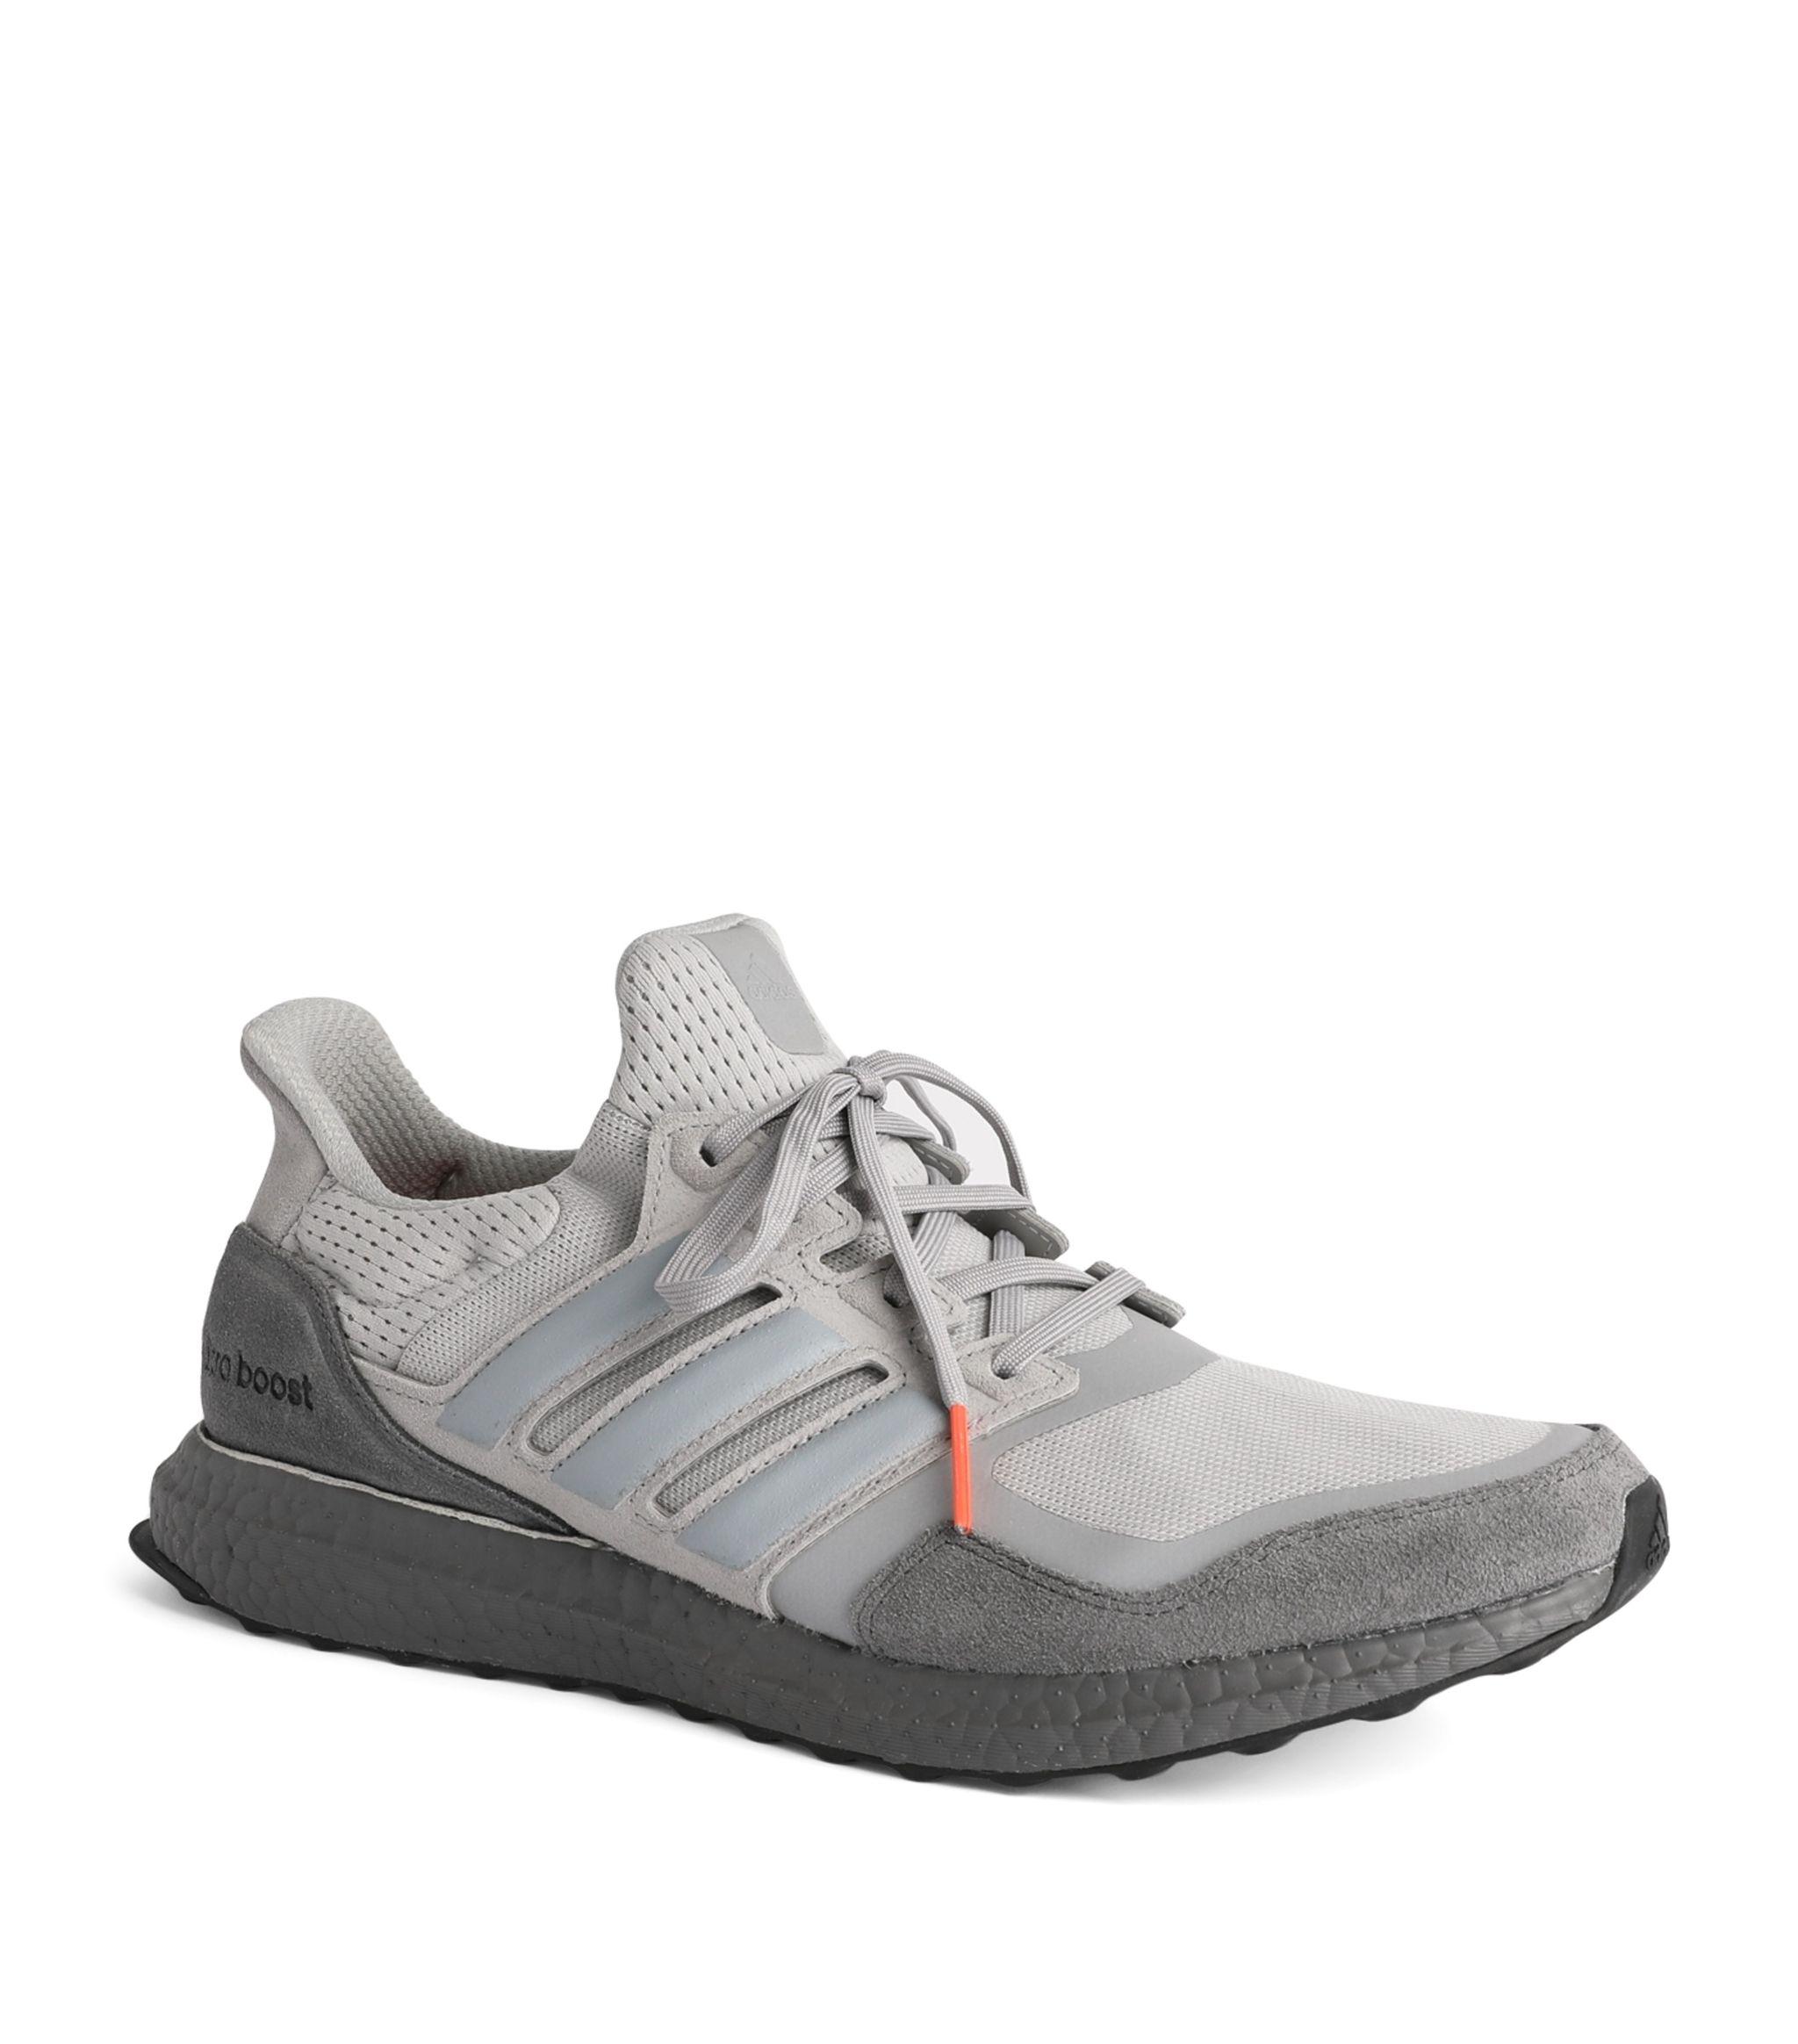 adidas Leather Ultraboost S&l Trainers in Gray for Men - Lyst